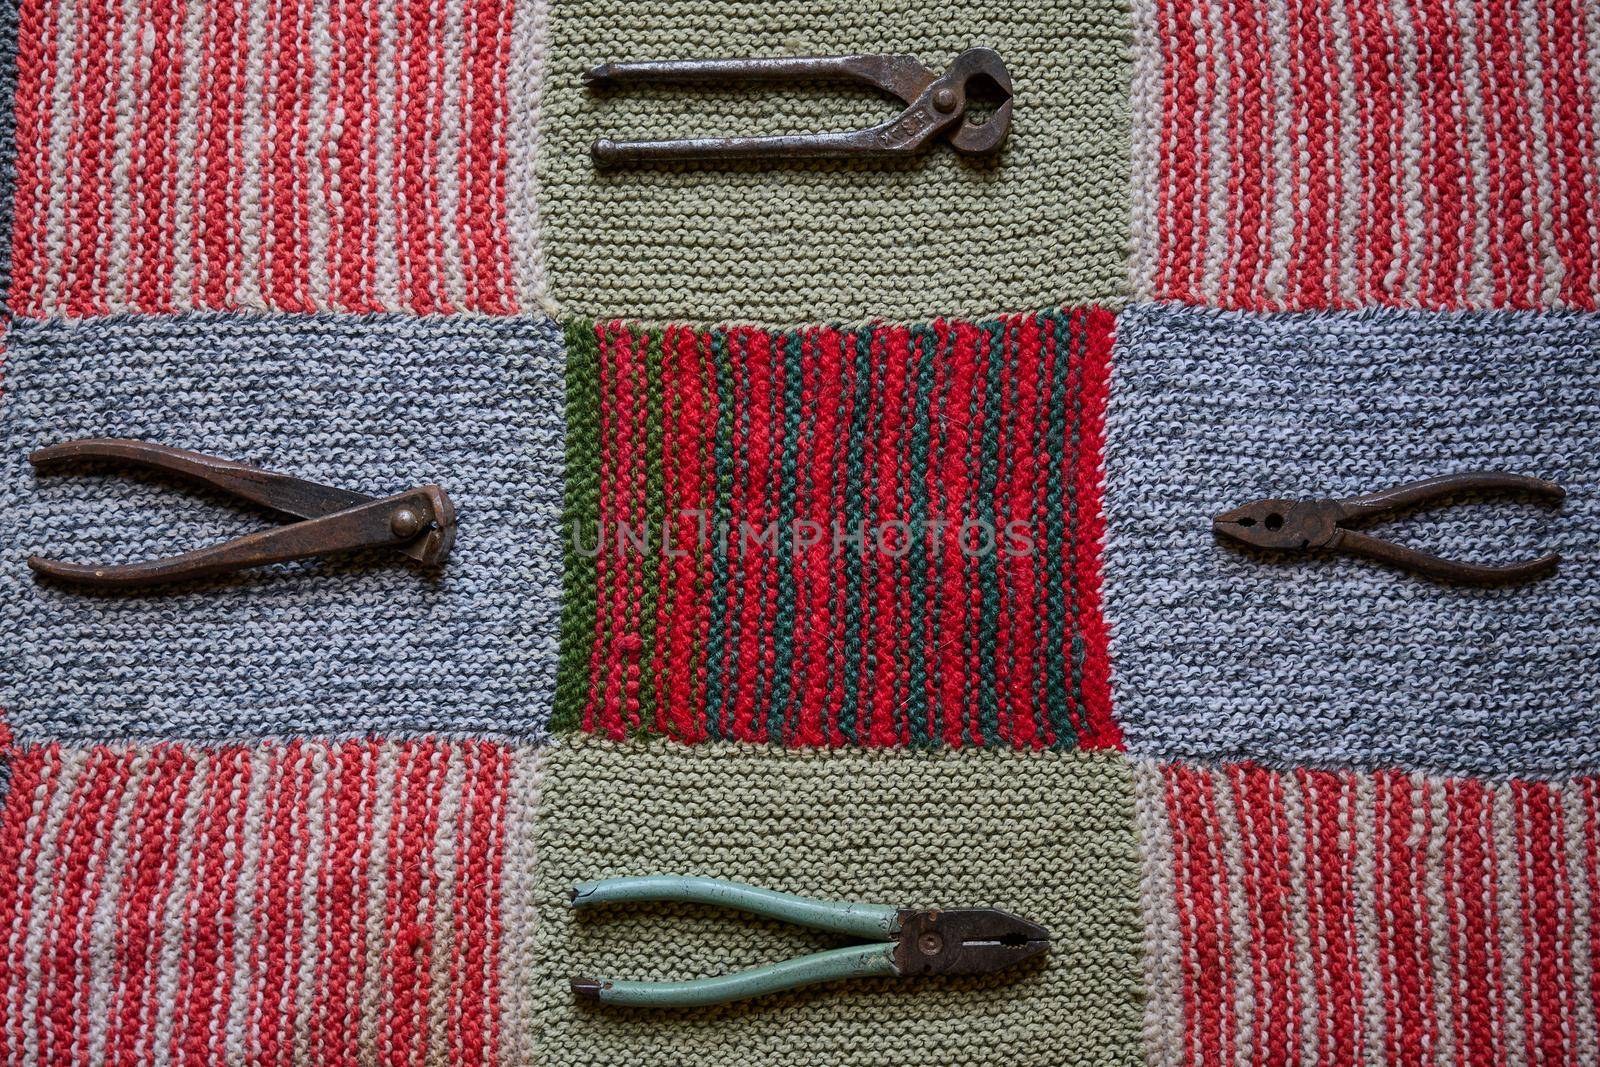 old and rusty tools on a multi-colored knitted tablecloth by ISRAFOTO